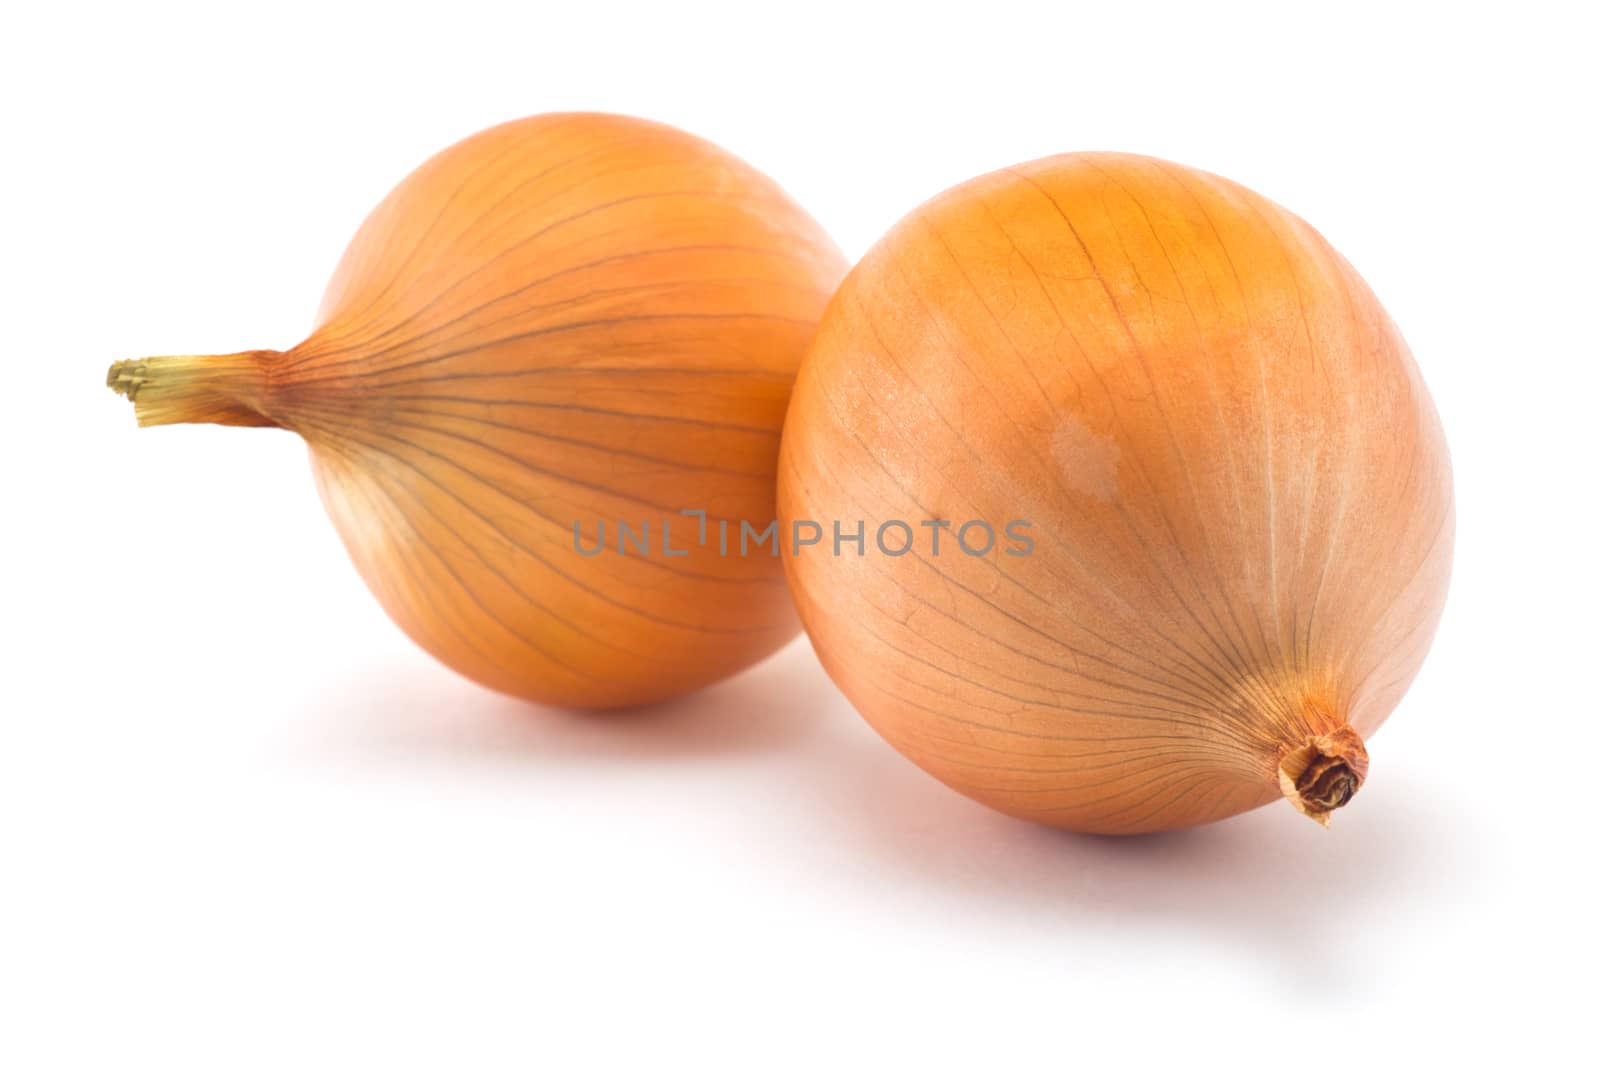 onions
onions on a white background
juicy onions
fresh onions
golden husks